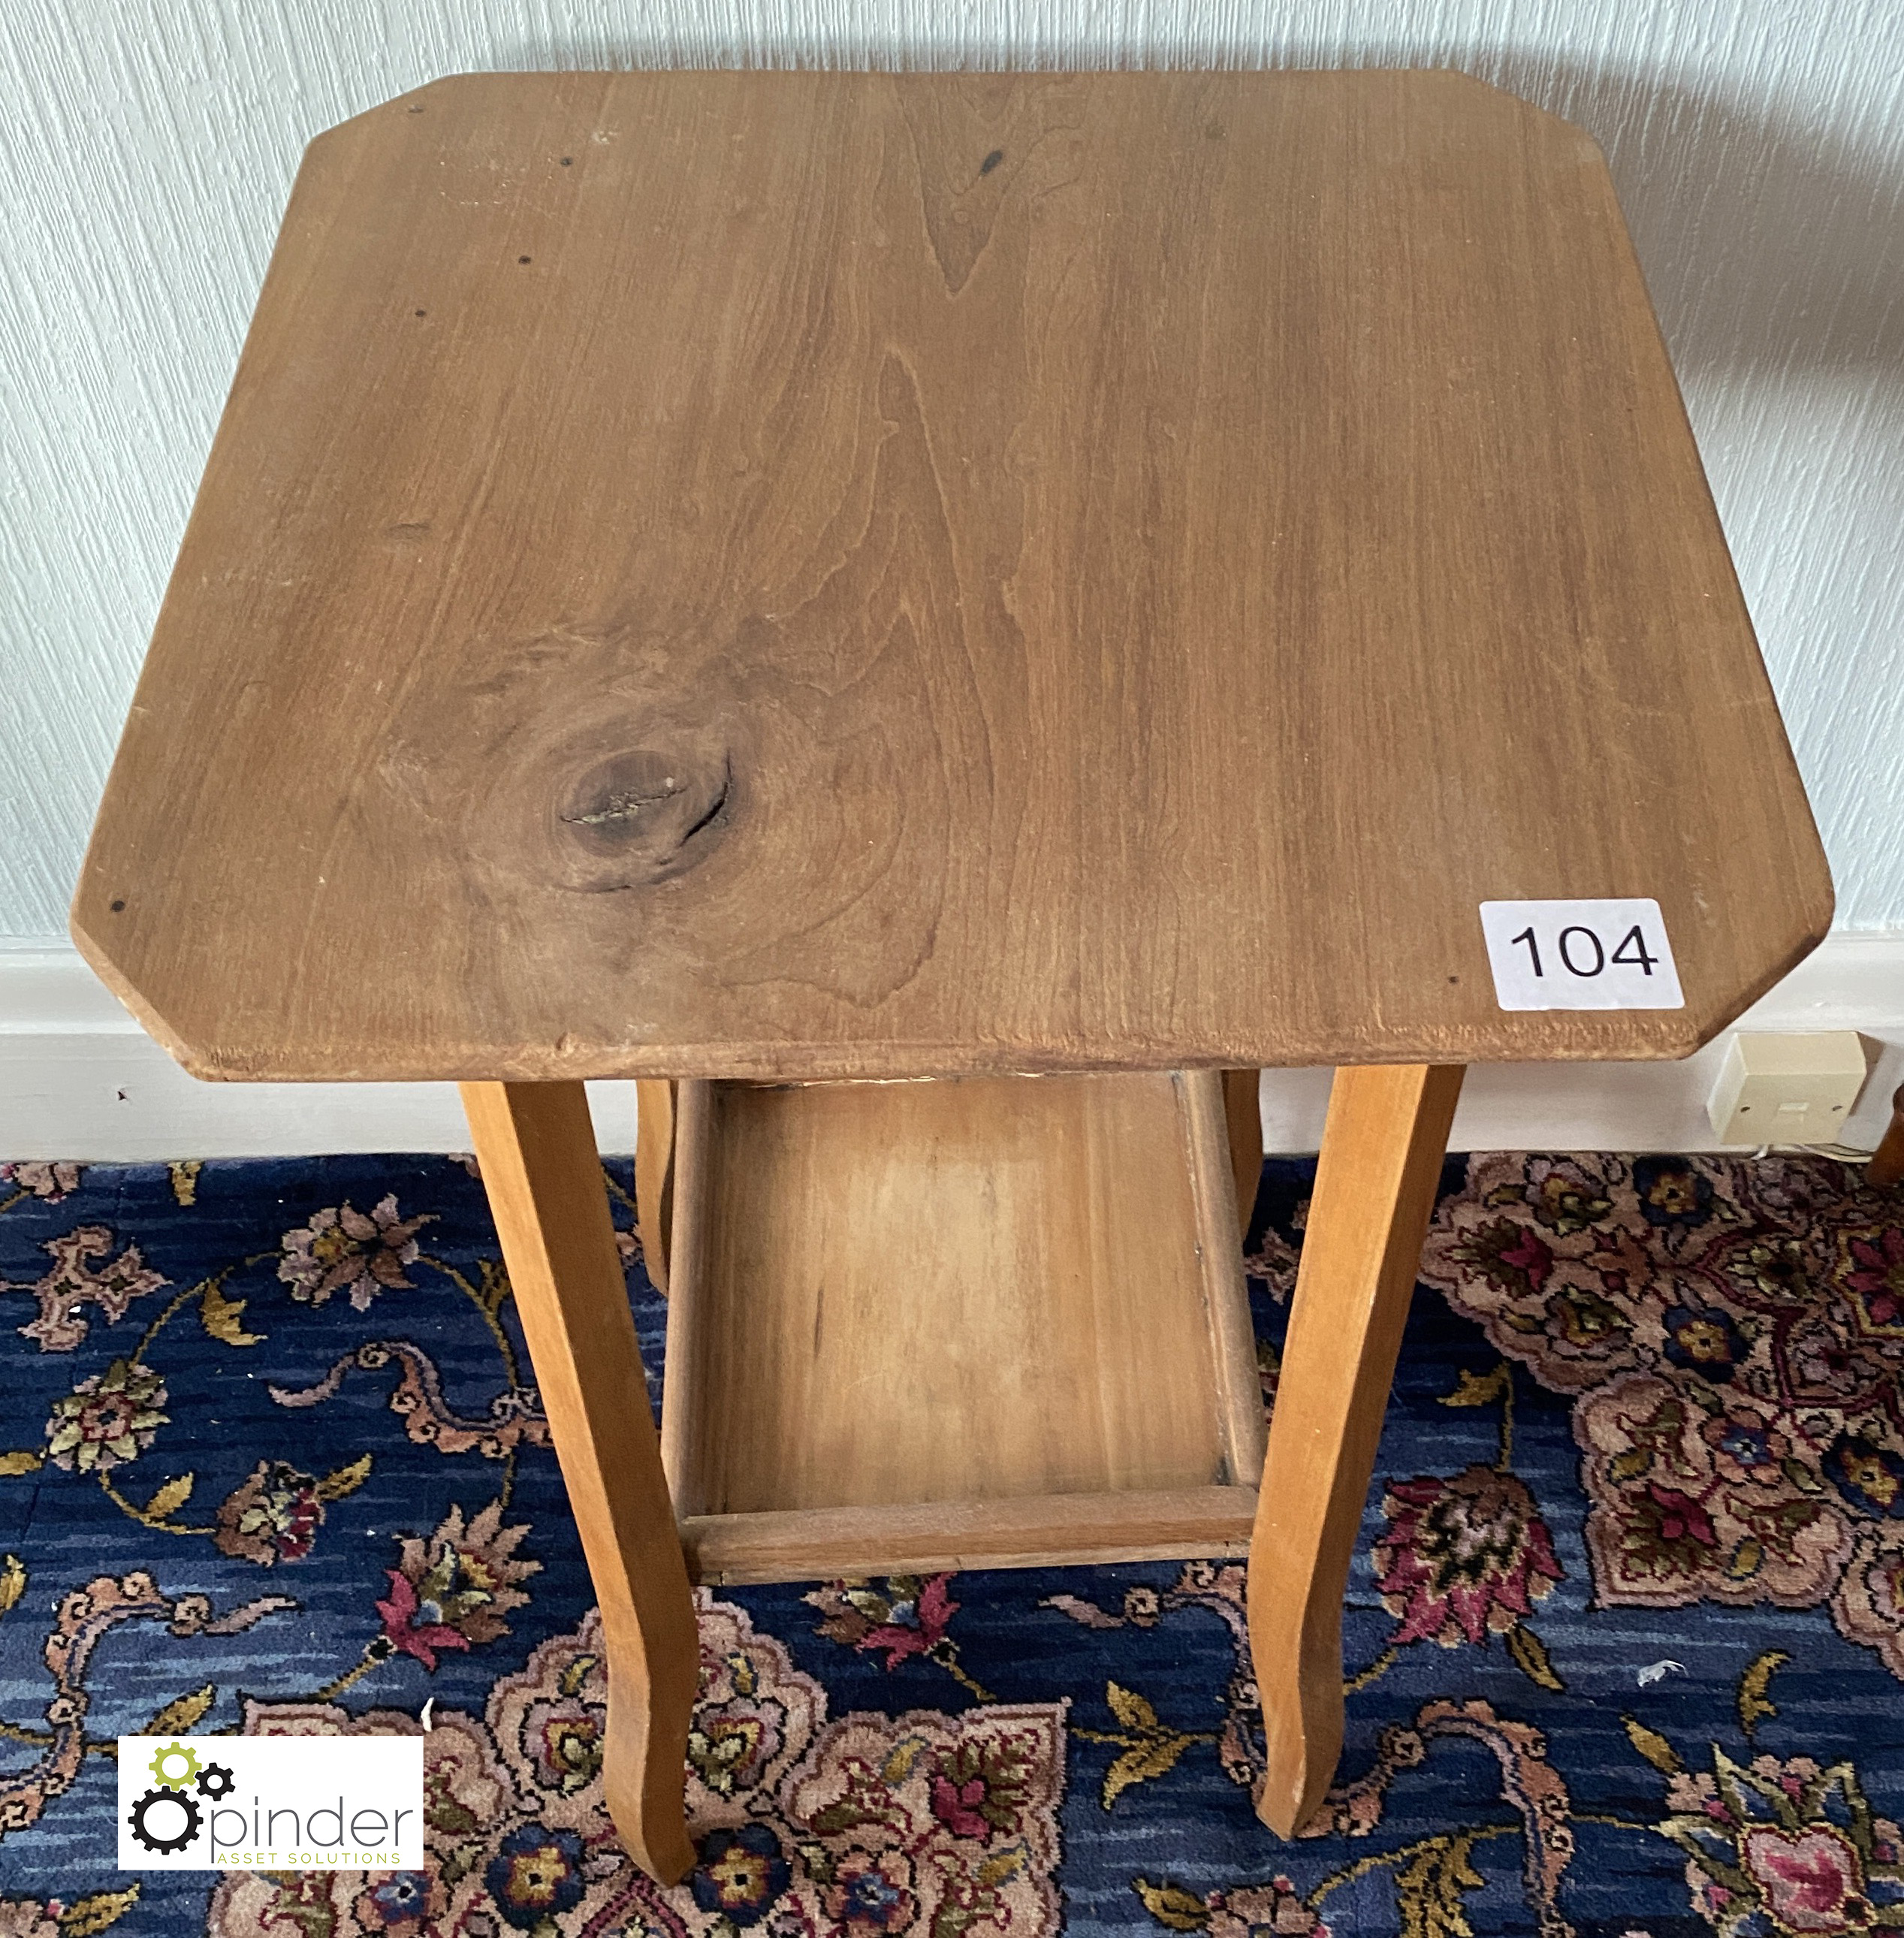 Pine Hall Table (location: Temple Newsam / collection: Tuesday 8 March between 9.30am and 12noon) - Image 2 of 2